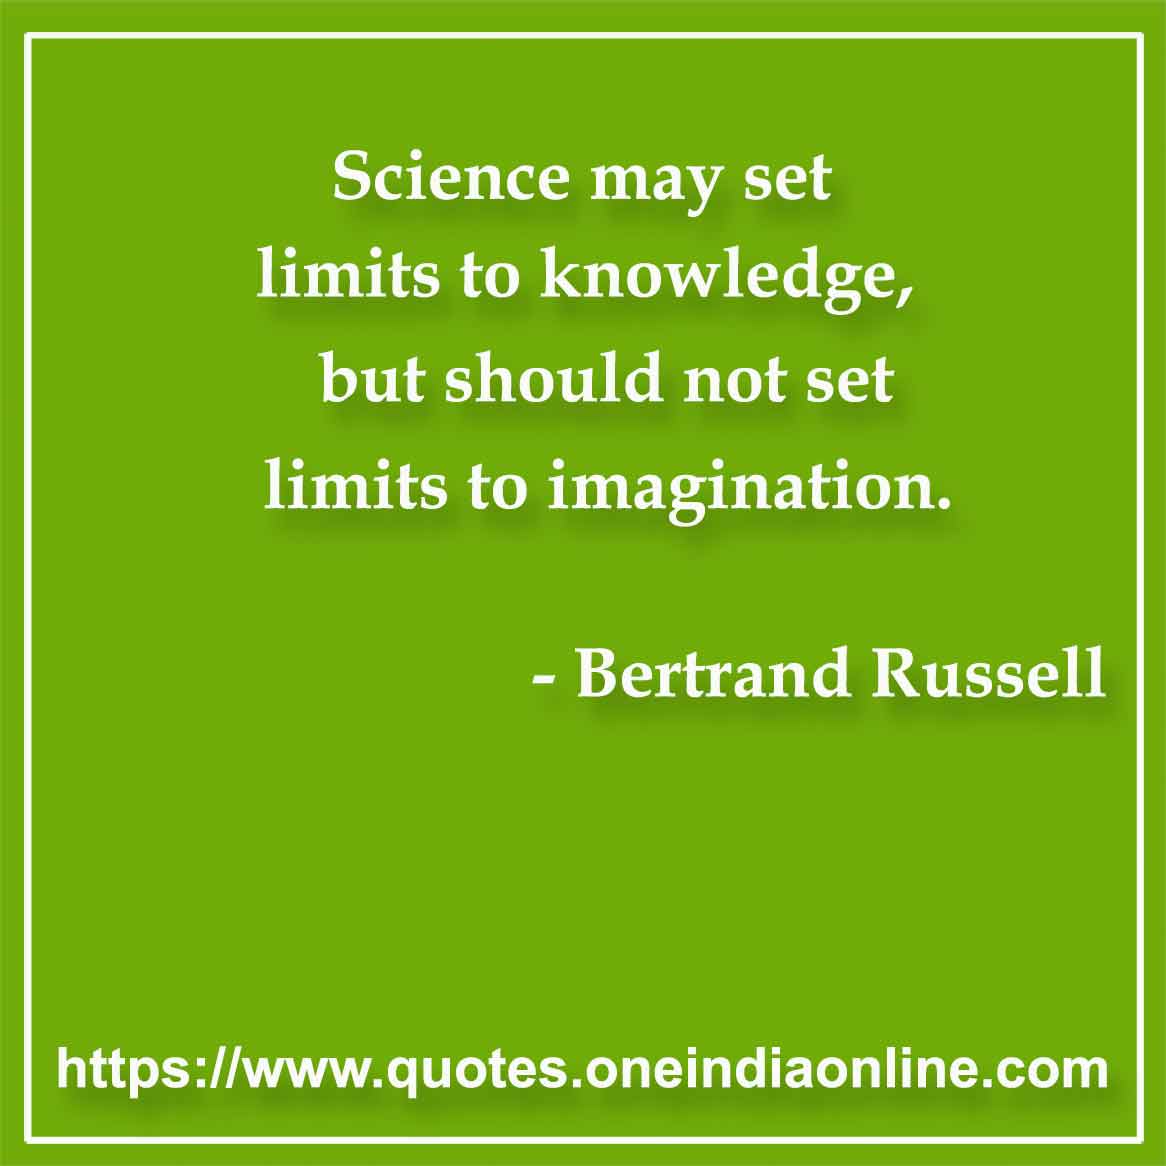 Science may set limits to knowledge, but should not set limits to imagination.

- Science Quotes by Bertrand Russell